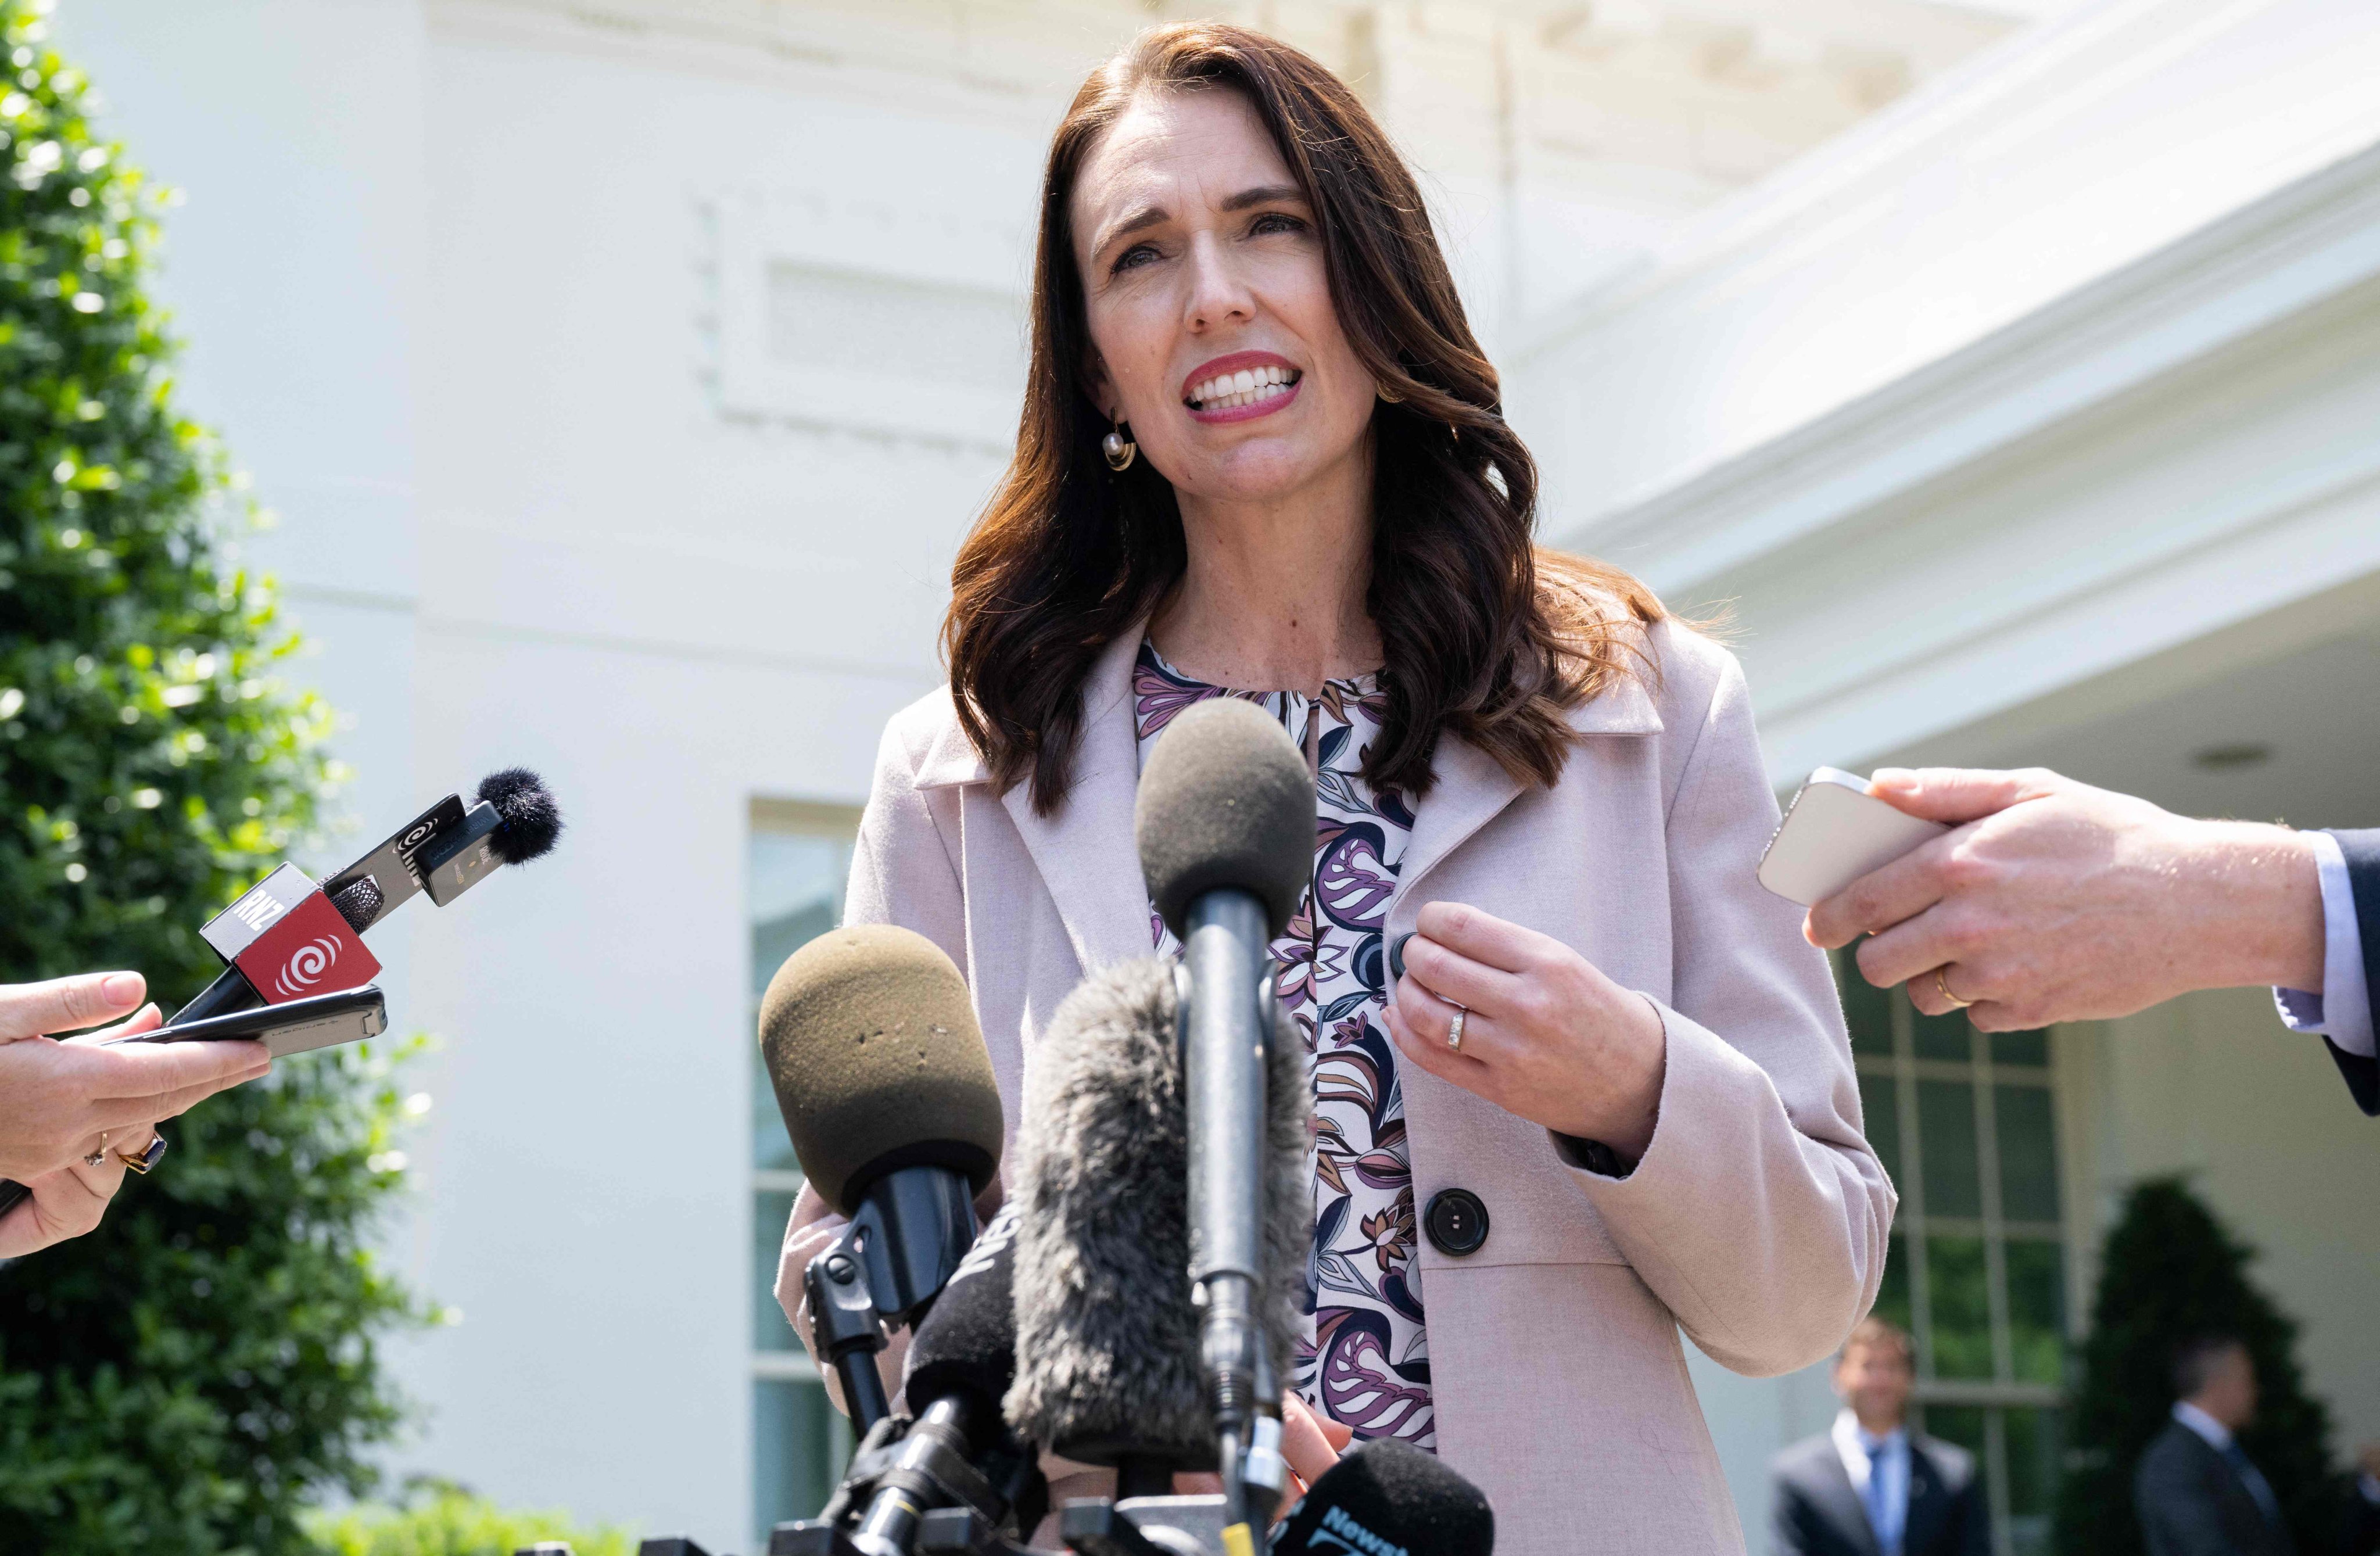 New Zealand Prime Minister Jacinda Ardern speaks to the press outside of the West Wing after a meeting with US President Joe Biden at the White House in Washington on May 31. Photo: AFP